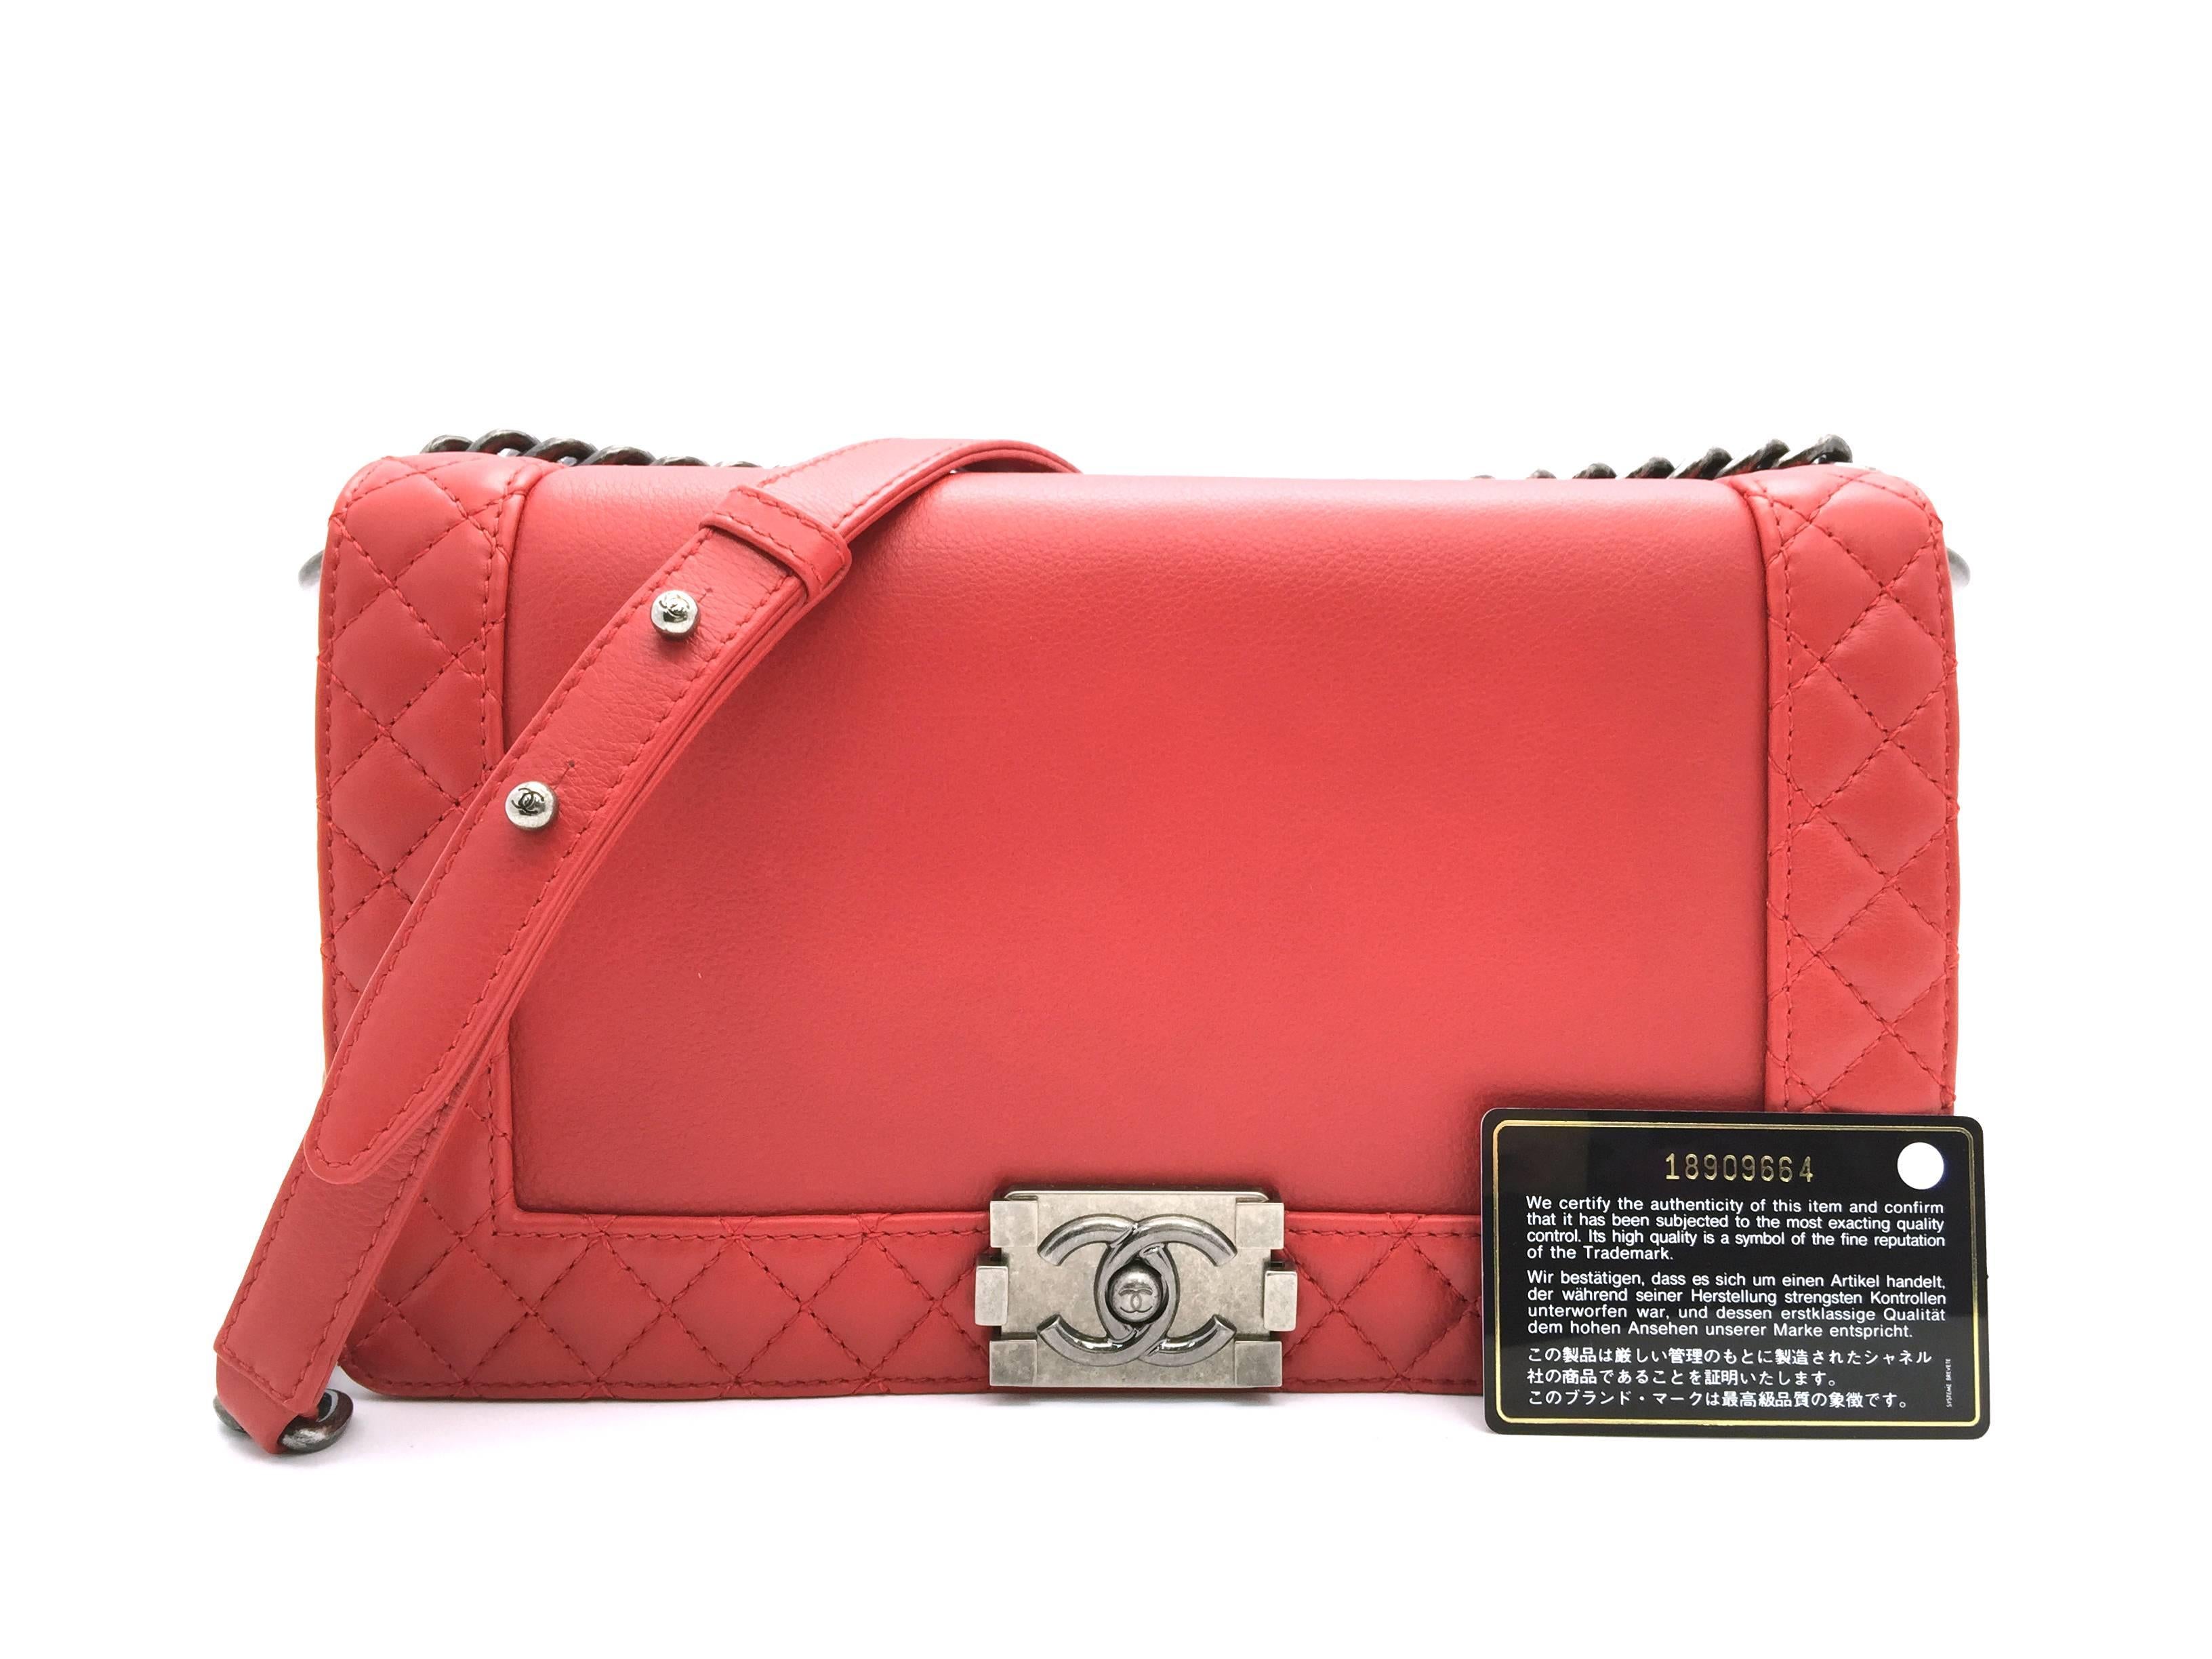 Color: Red 
Material: Quilted Lambskin Leather

Condition:
Rank S
Overall: Almost New
Surface: Good
Corners: Good
Edges: Good
Handles/Straps: Good
Hardware: Good

Dimension:
W28 × H16 × D7cm（W11.0" × H6.2" × D2.7"）
Shoulder strap